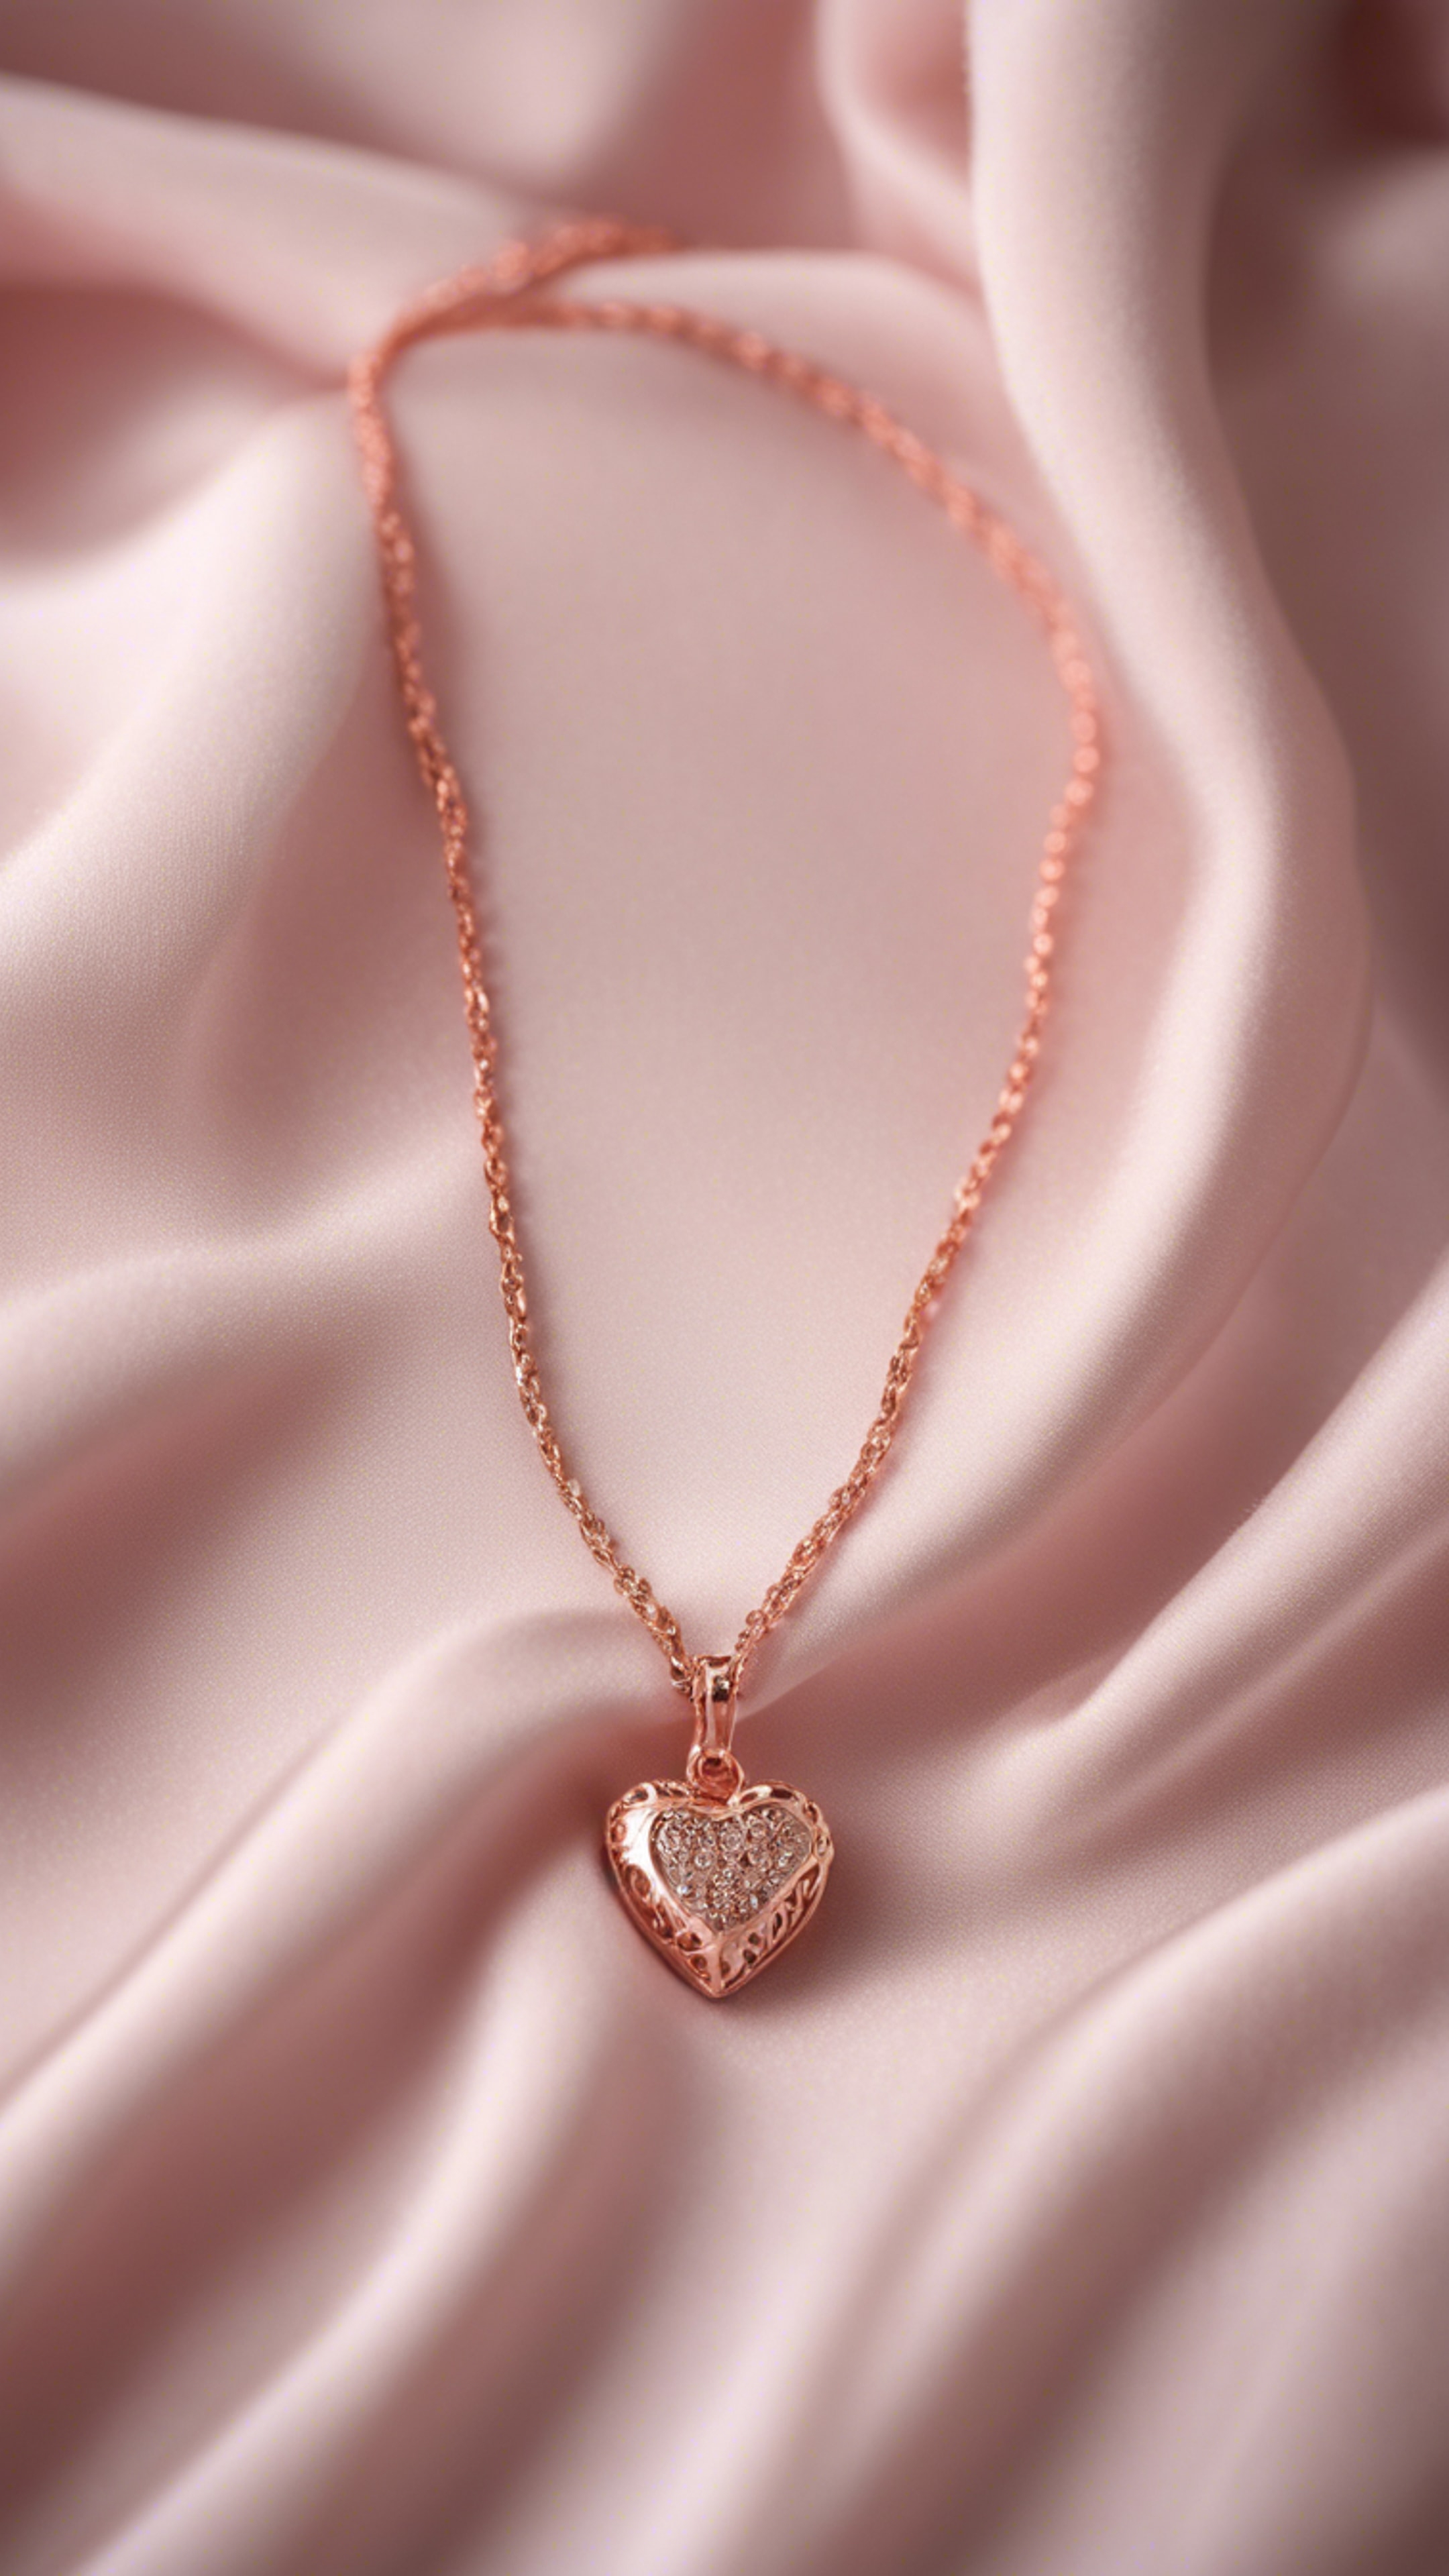 A delicate rose gold chain necklace with a small heart pendant, displayed on a soft pink satin fabric.壁紙[1bffd5f9a0f0499fae91]